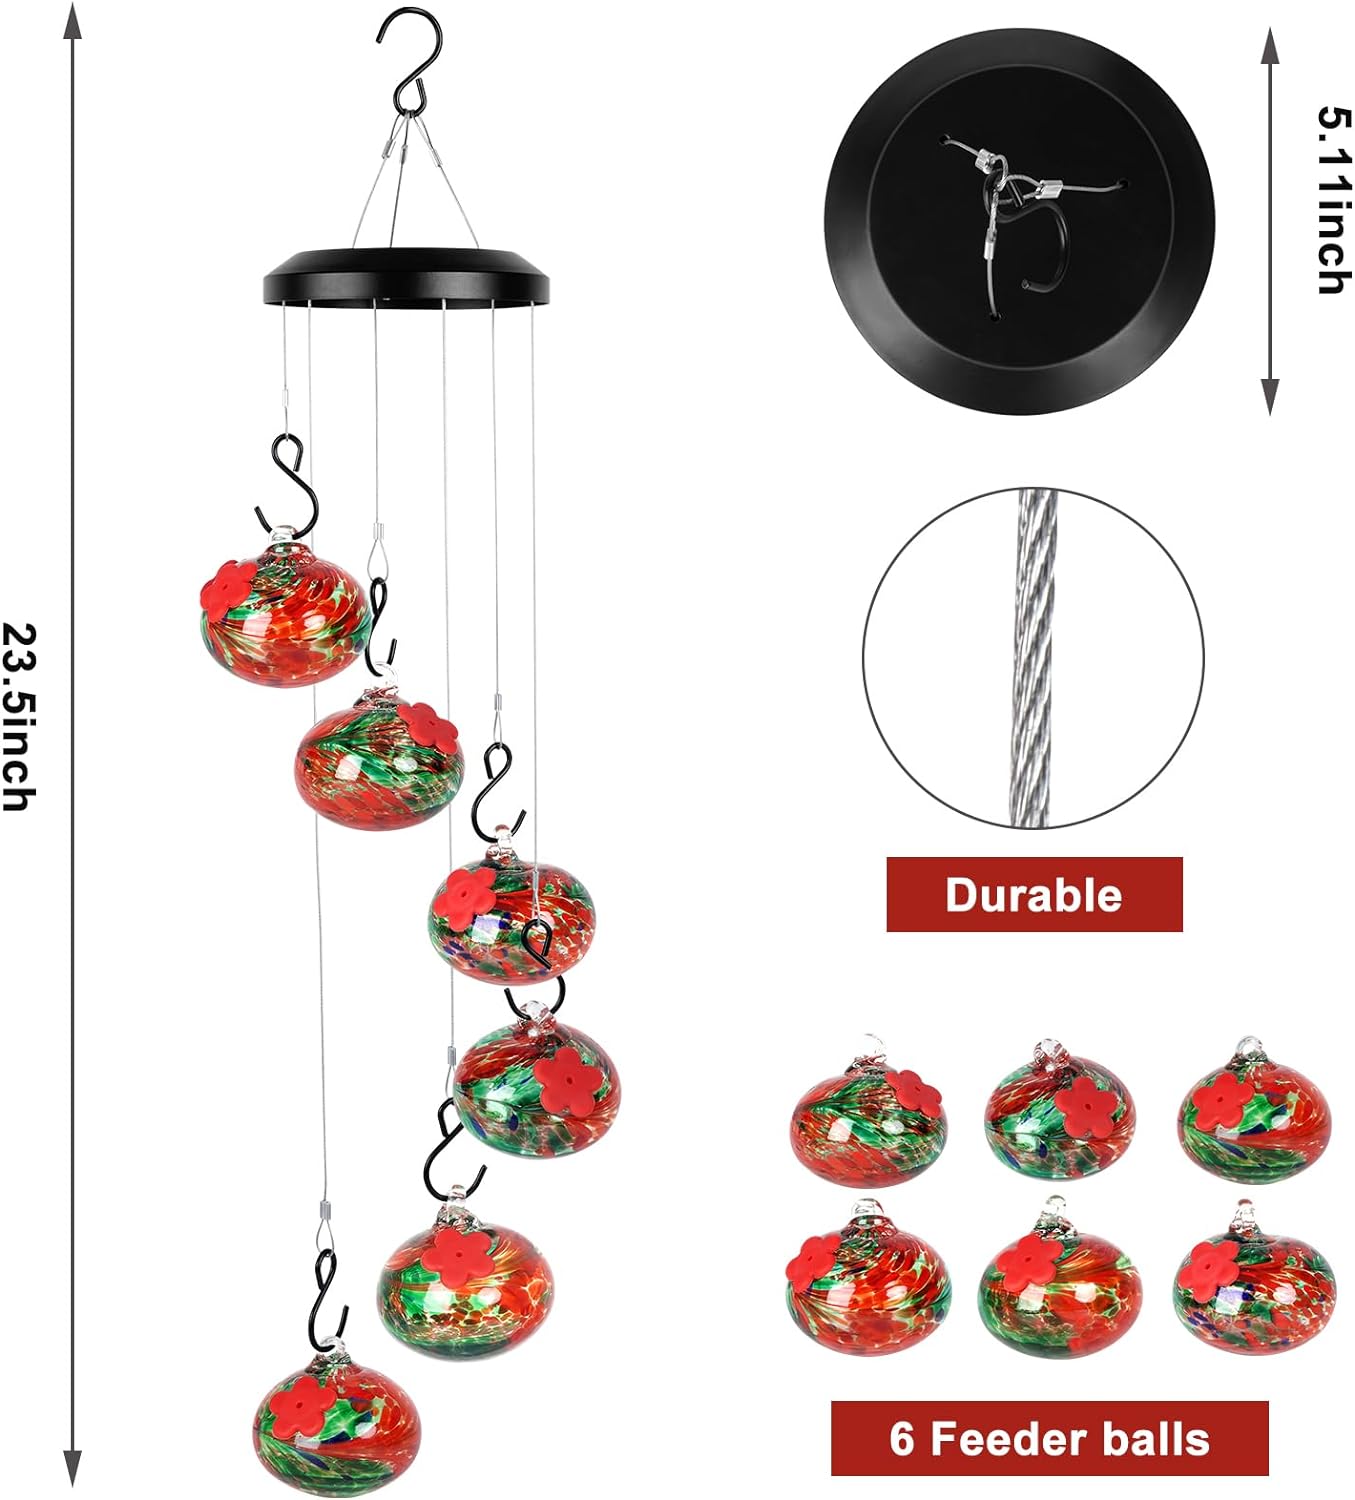 Leak-Proof Hummingbird Feeder Wind Chimes - Ant & Bee Resistant, Durable Outdoor Hanging Decor - Attract More Hummingbirds to Your Garden Today